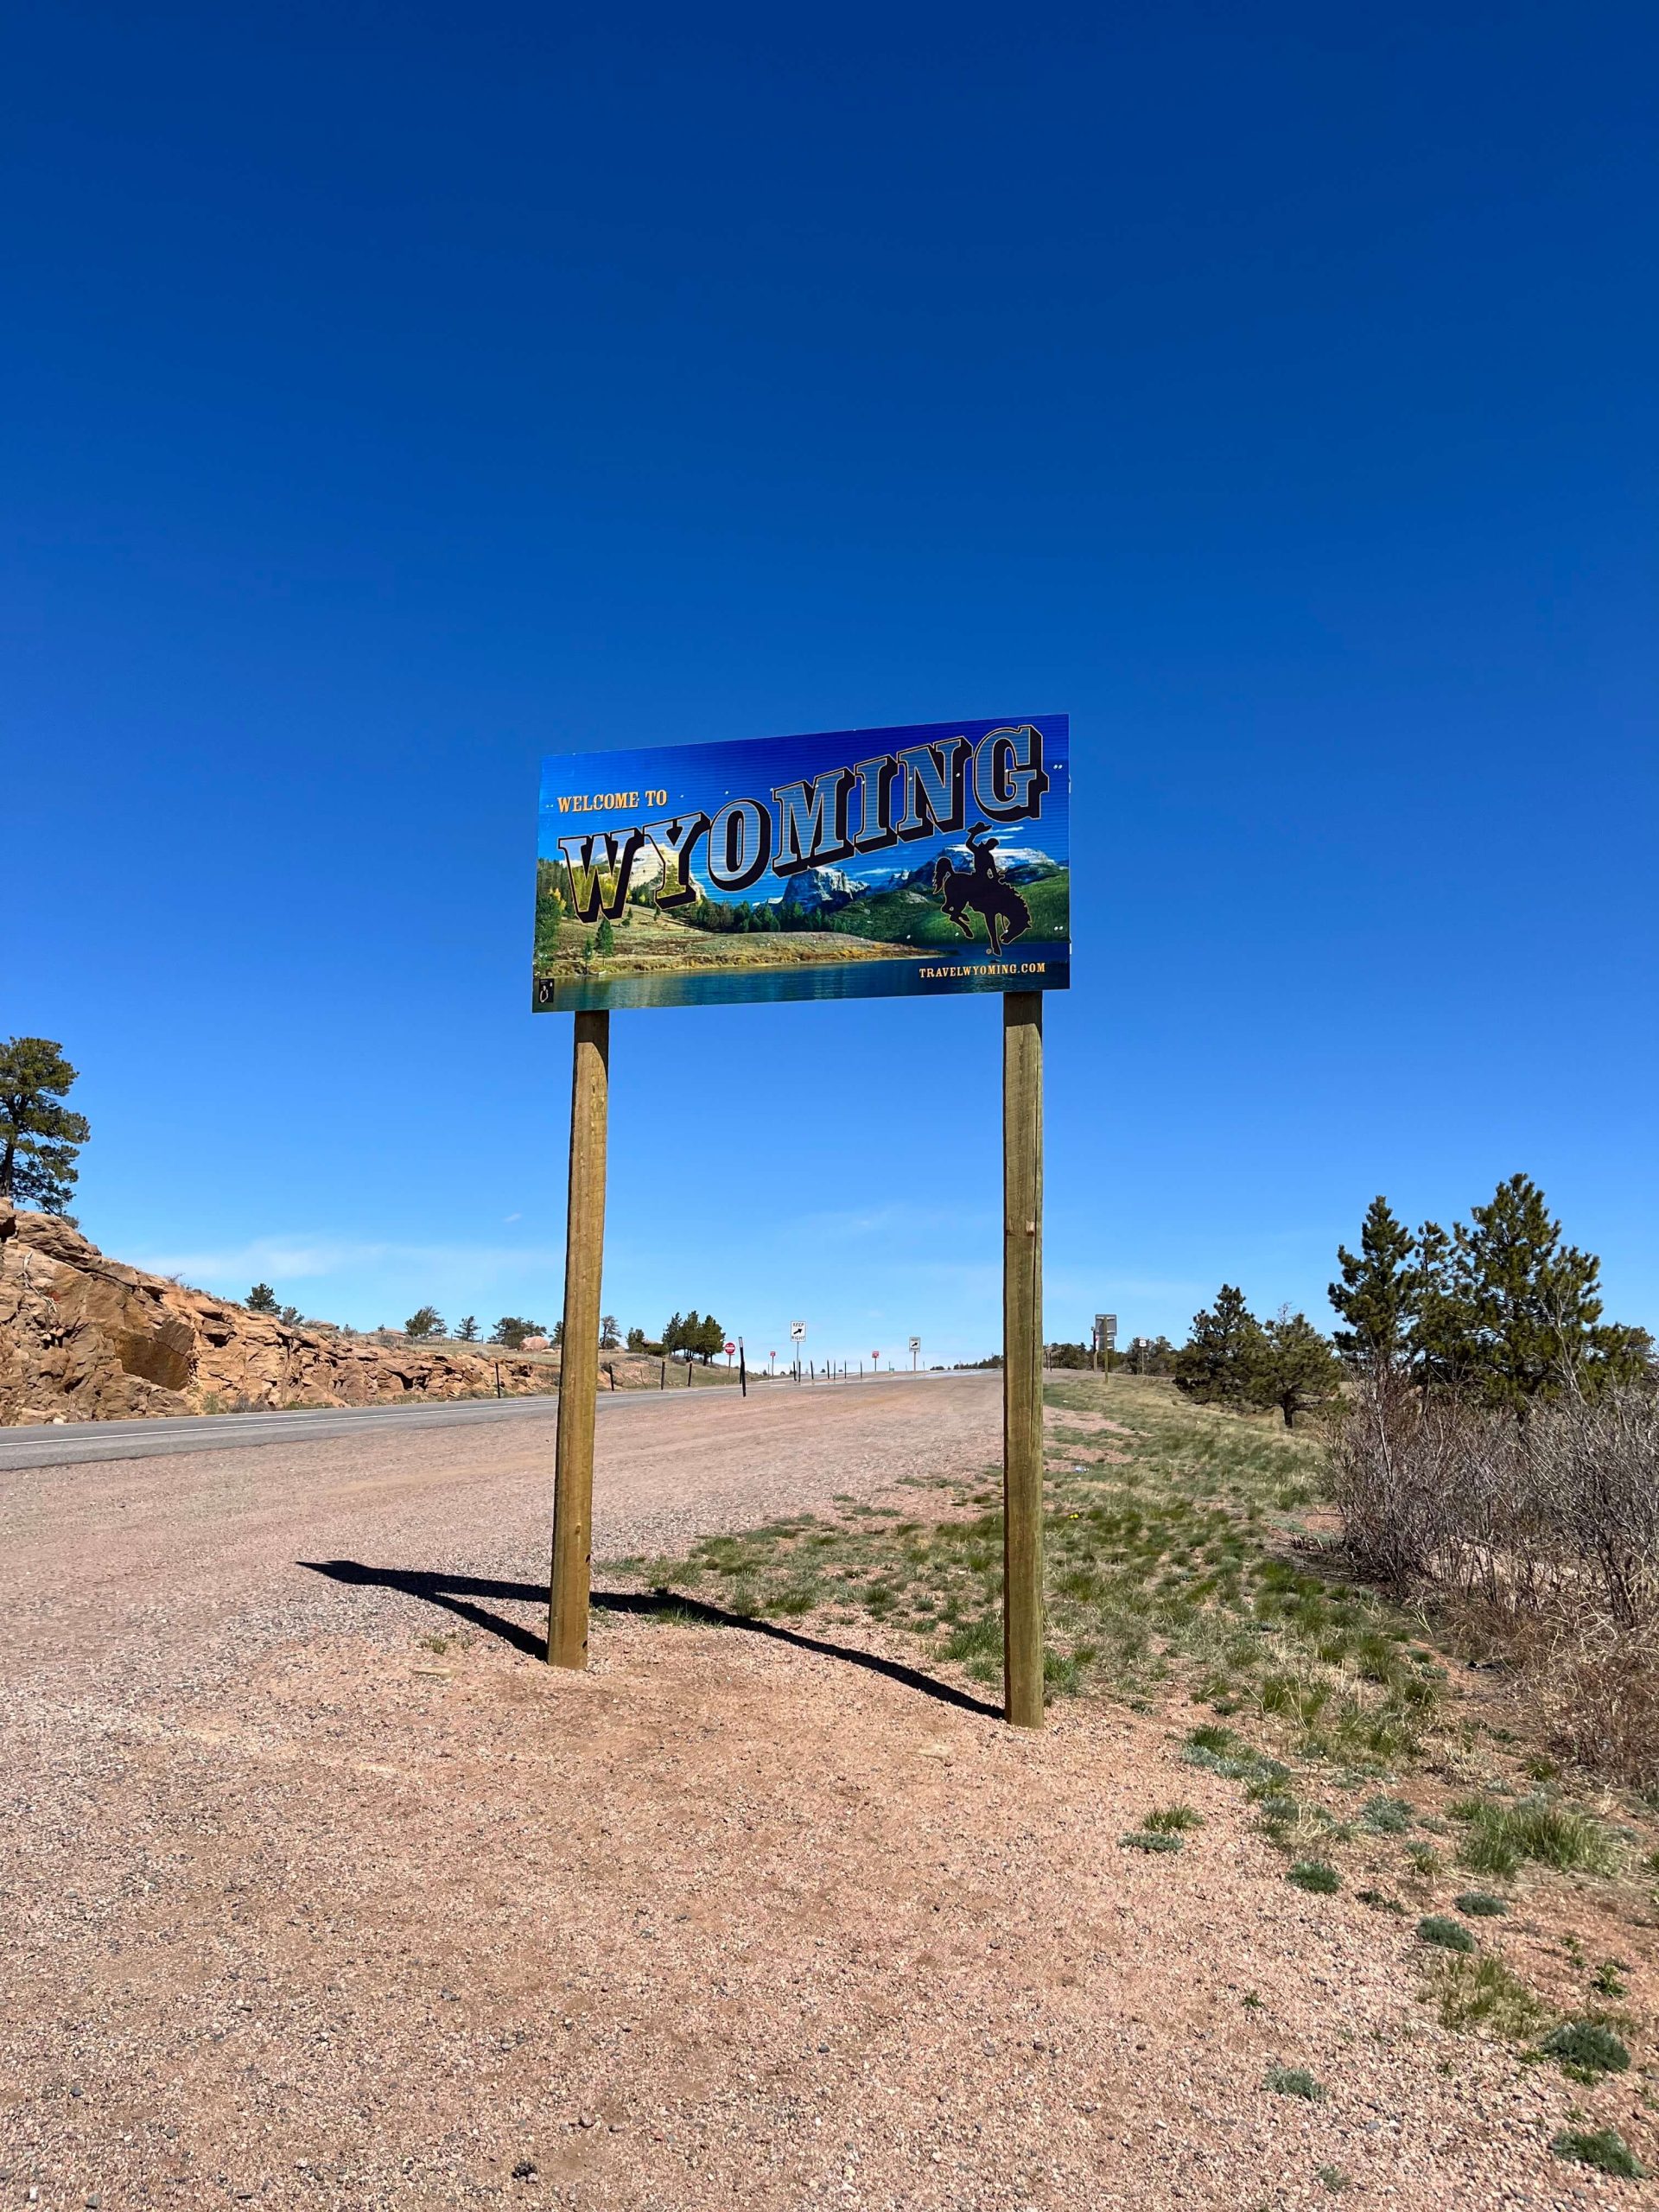 A picture of the Wyoming state sign at the border.